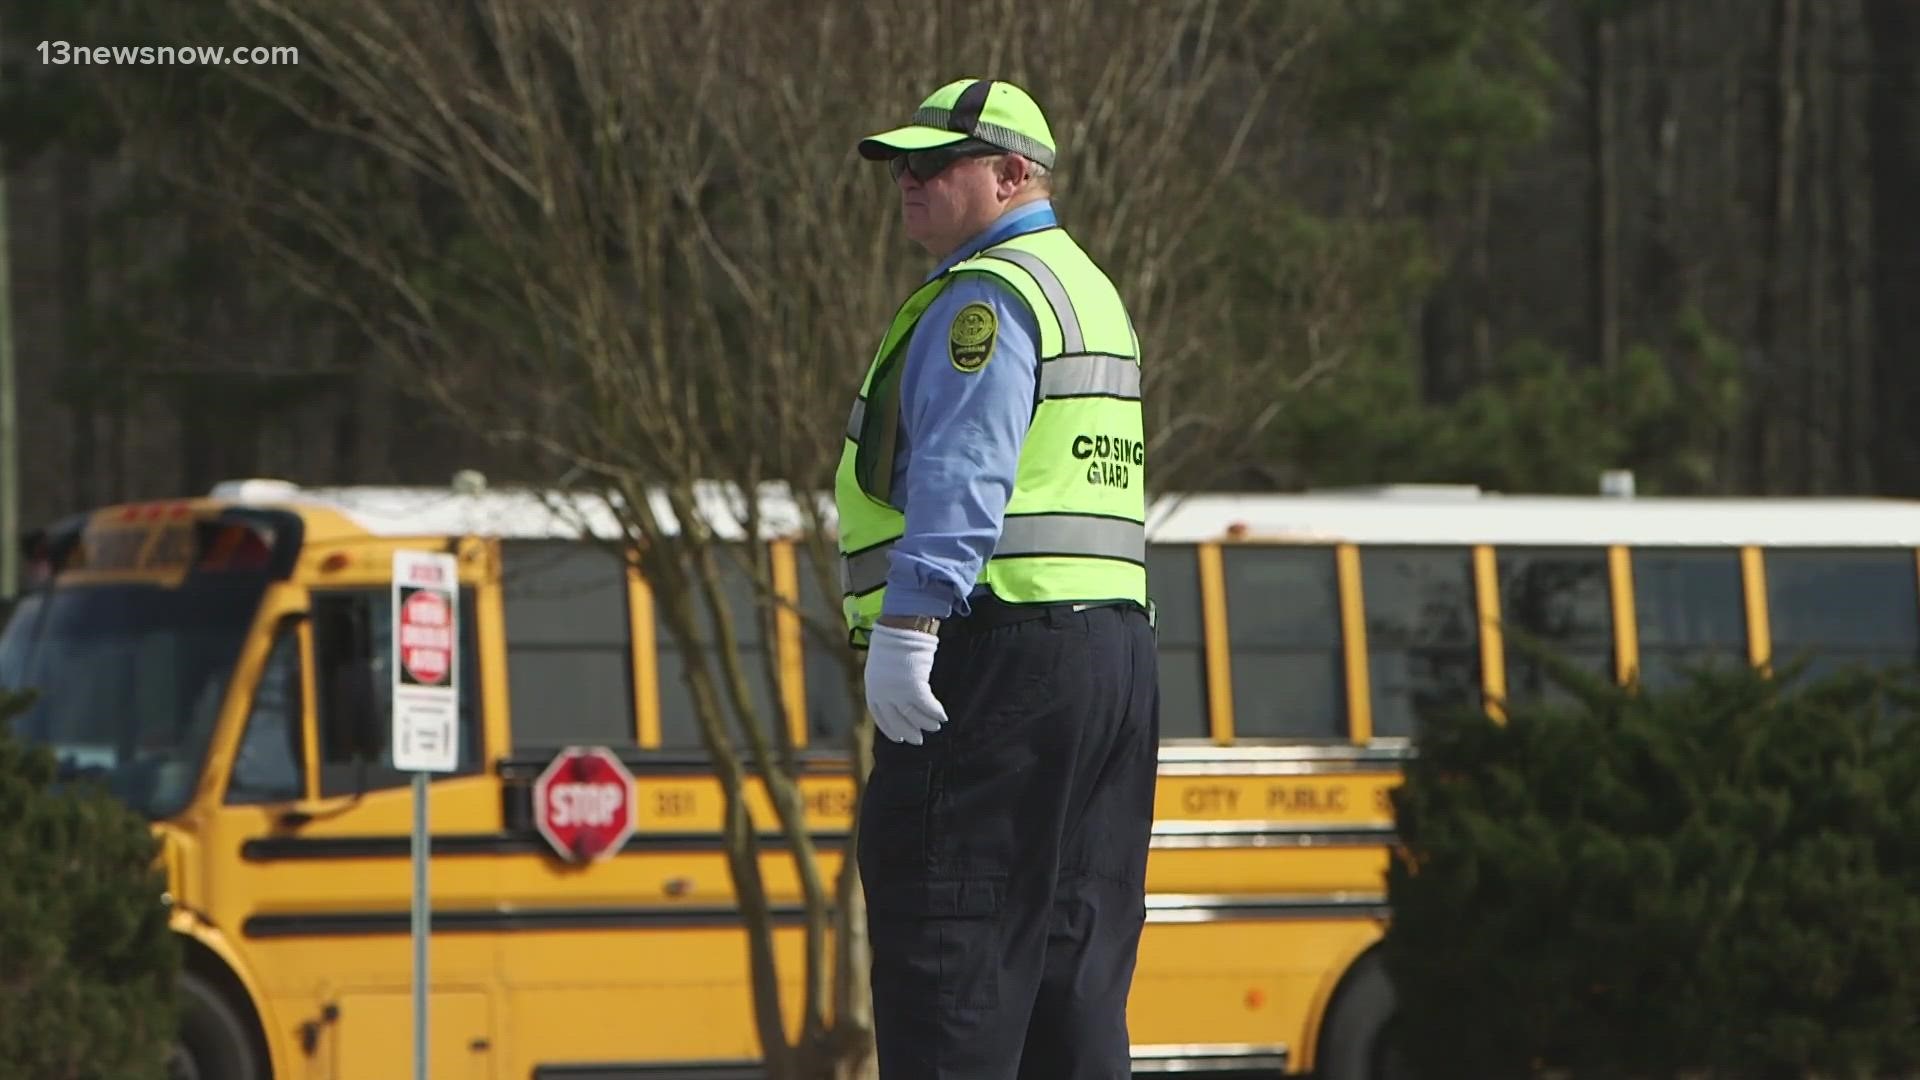 Michael Judson is the only crossing guard honored from the Hampton Roads area.